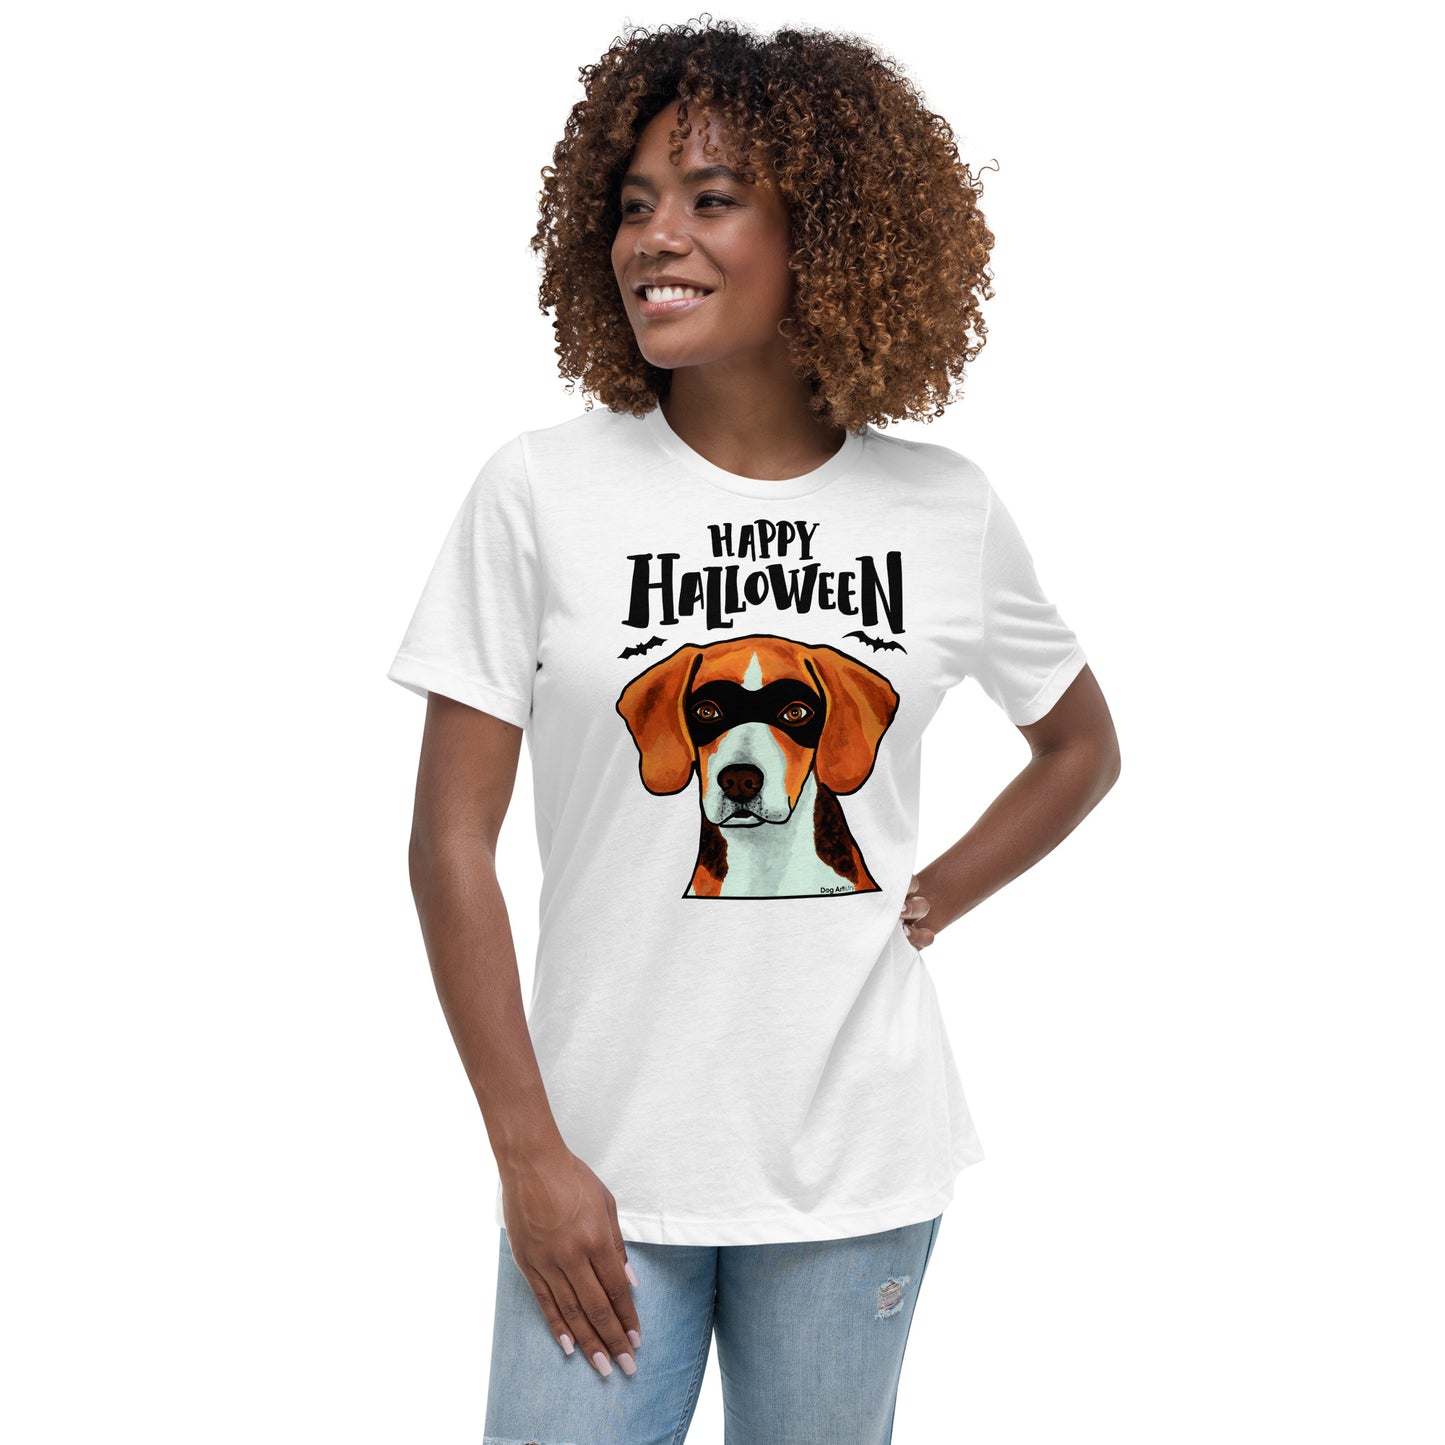 Funny Happy Halloween Beagle wearing mask women’s white t-shirt by Dog Artistry.